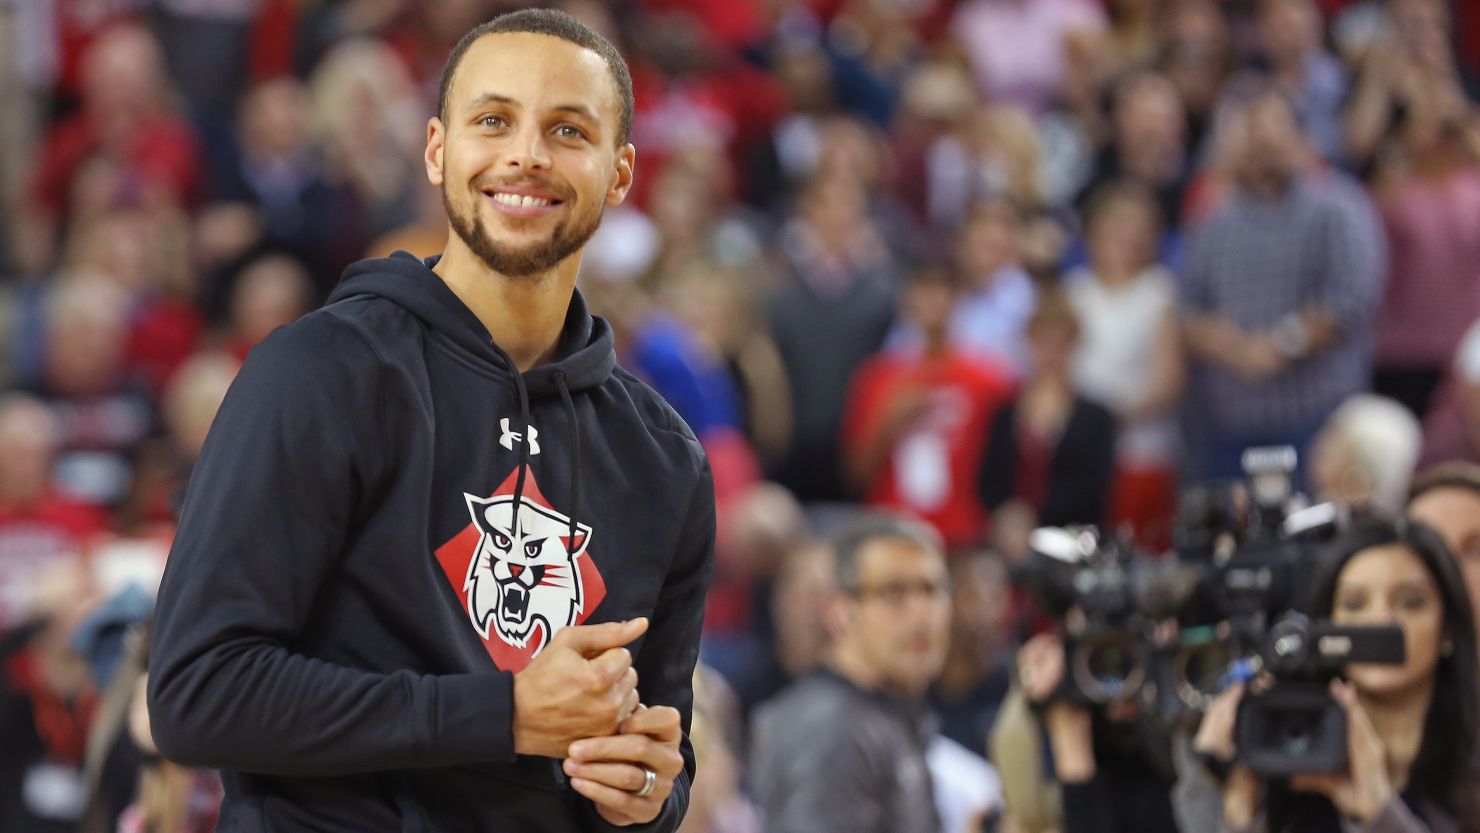 Steph Curry smiles on the court during a ceremony to name the student section at Davidson College's John M. Belk Area after him, on January 24, 2017.